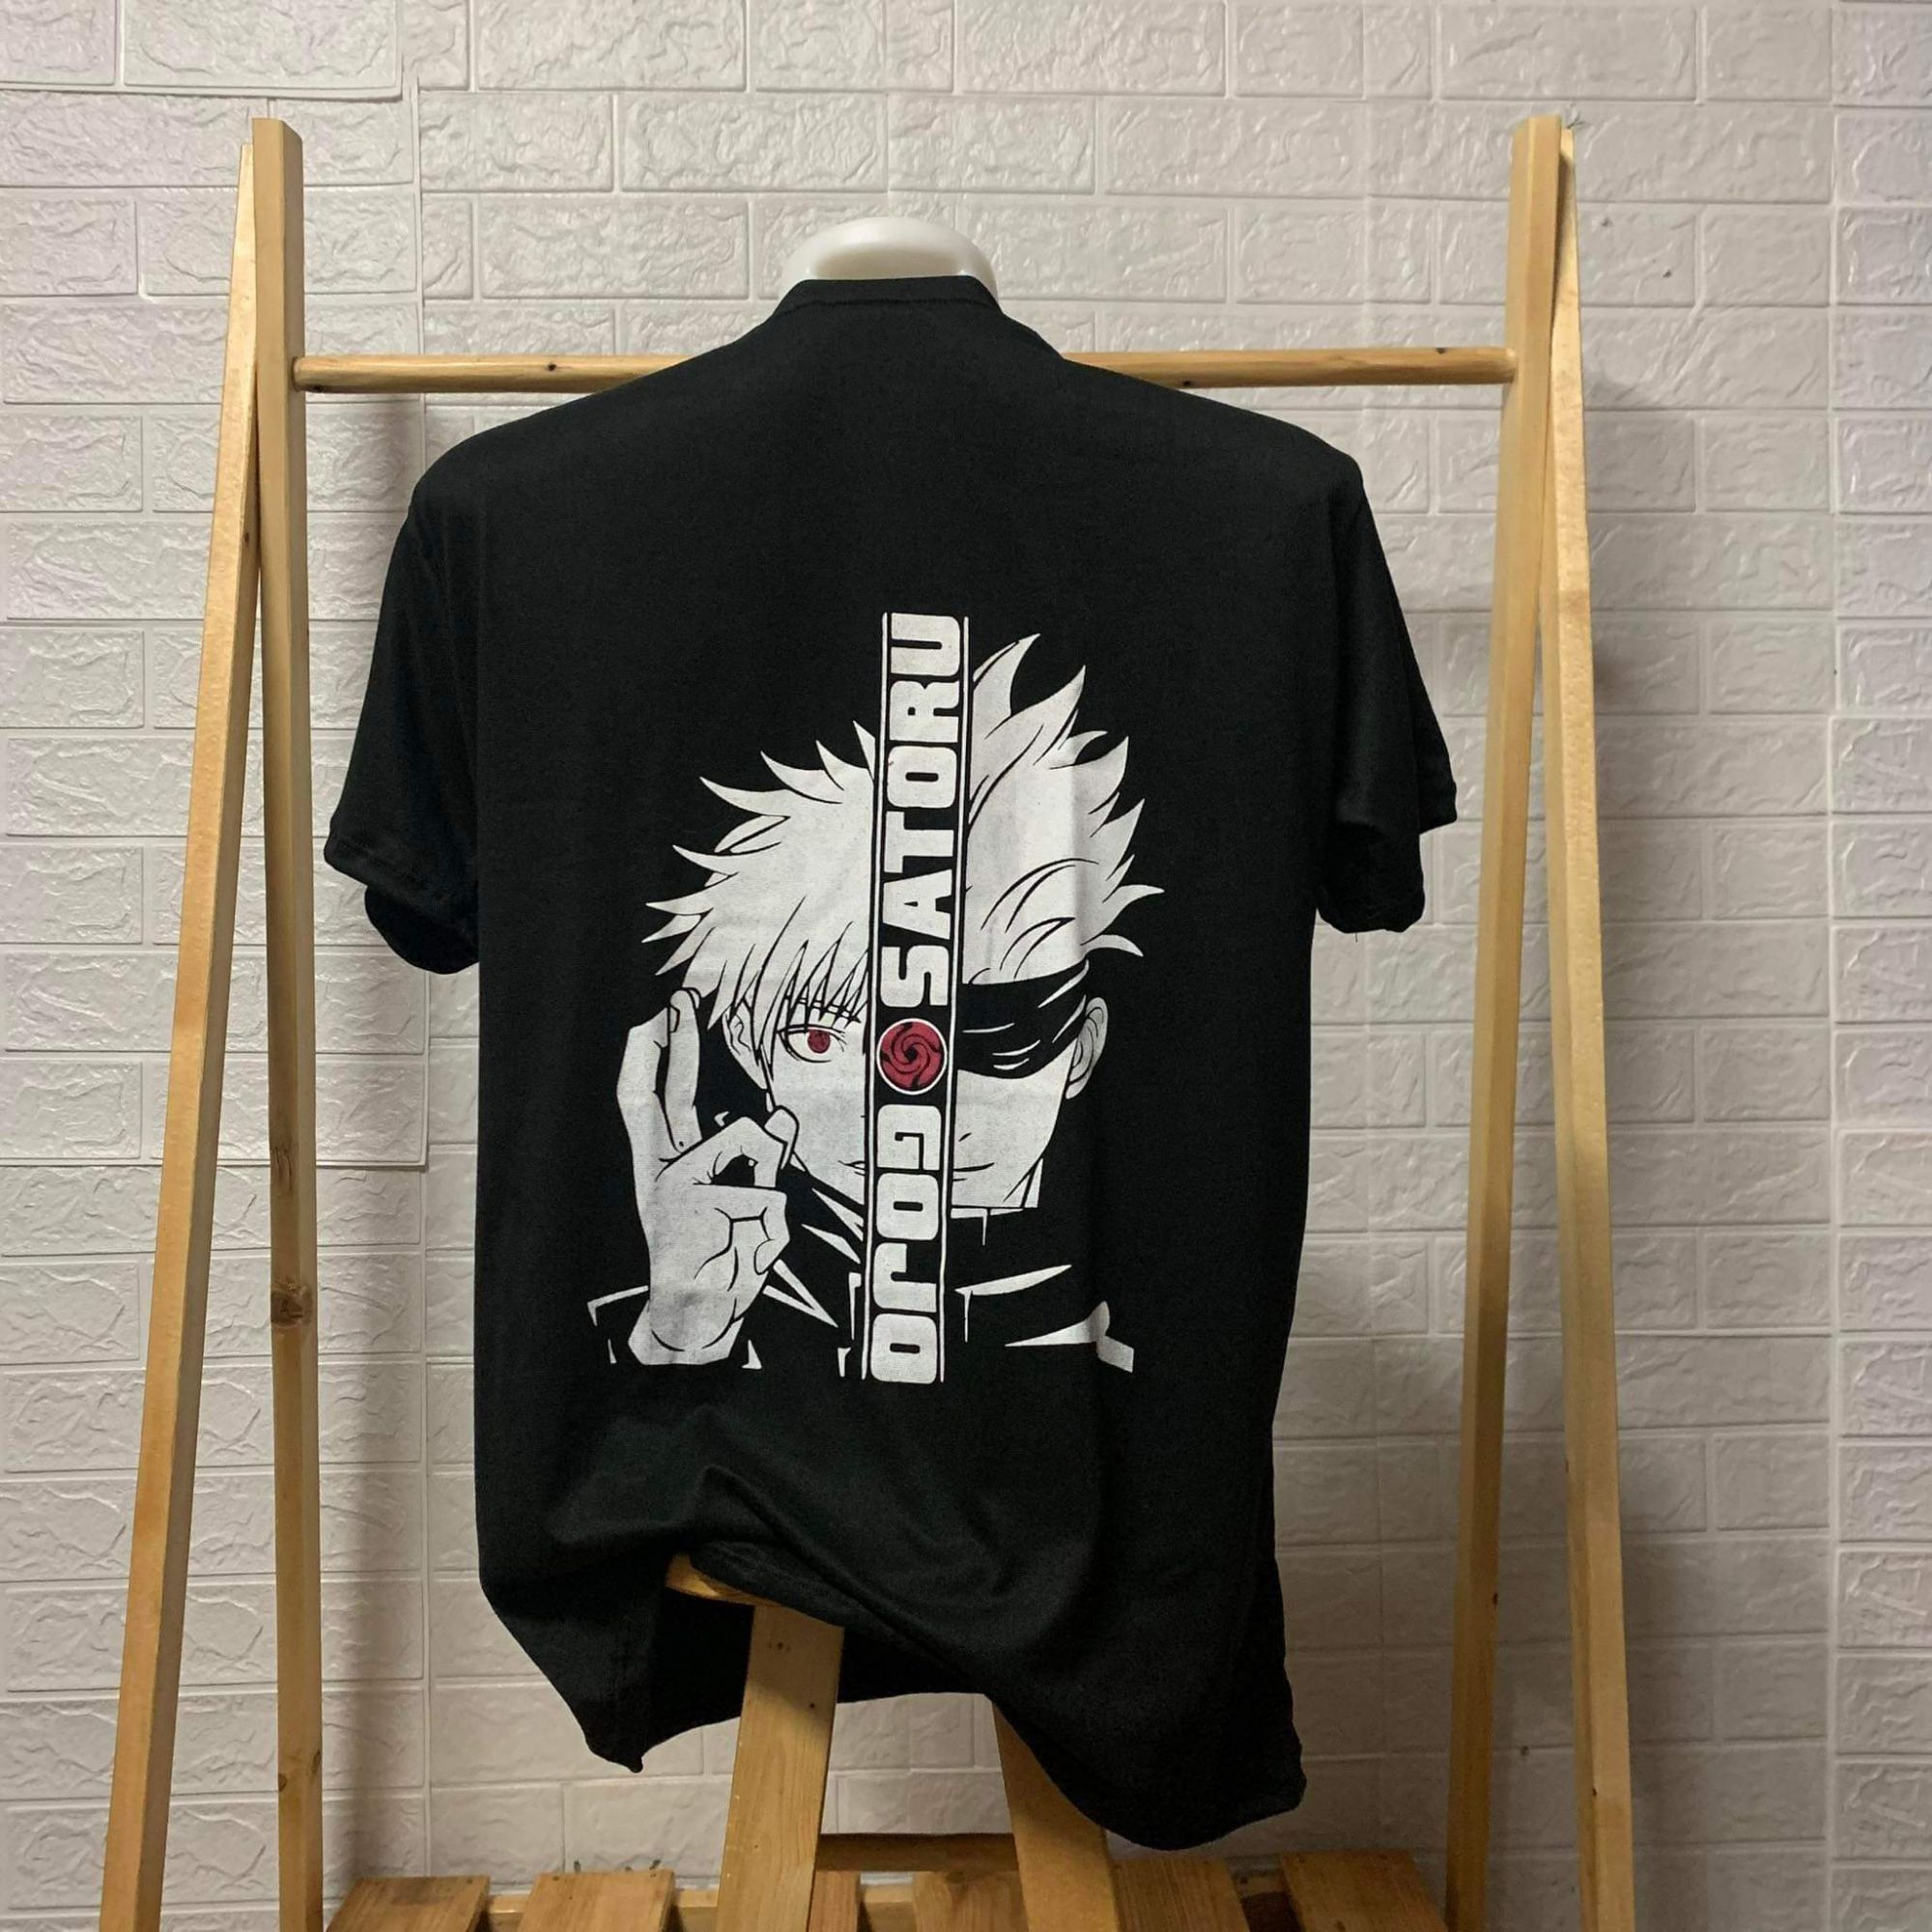 Anime T-Shirts - Buy Cool Anime Printed T-Shirts Online at Bewakoof